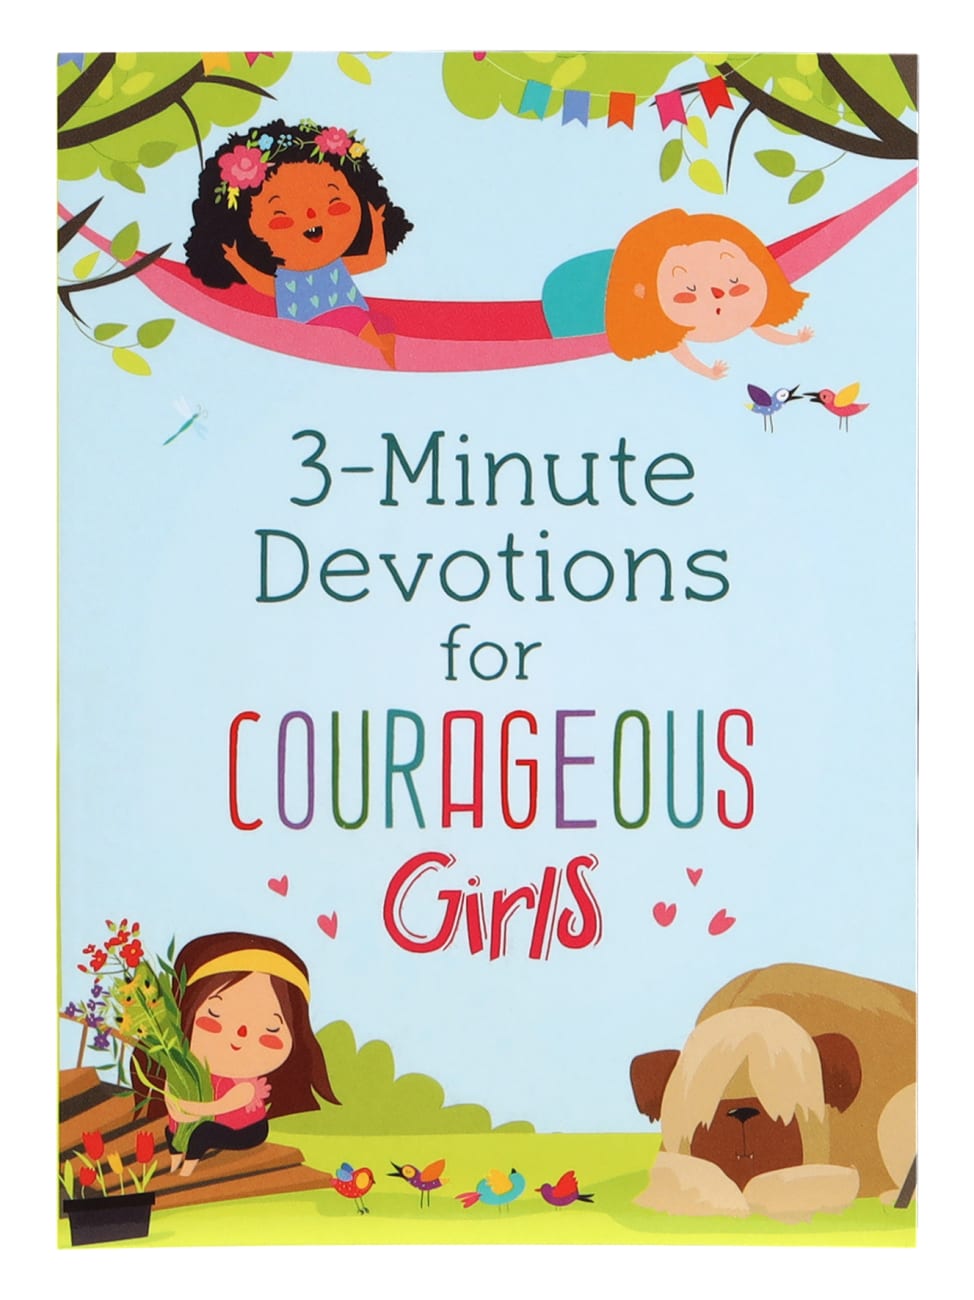 3-MINUTE DEVOTIONS FOR COURAGEOUS GIRLS